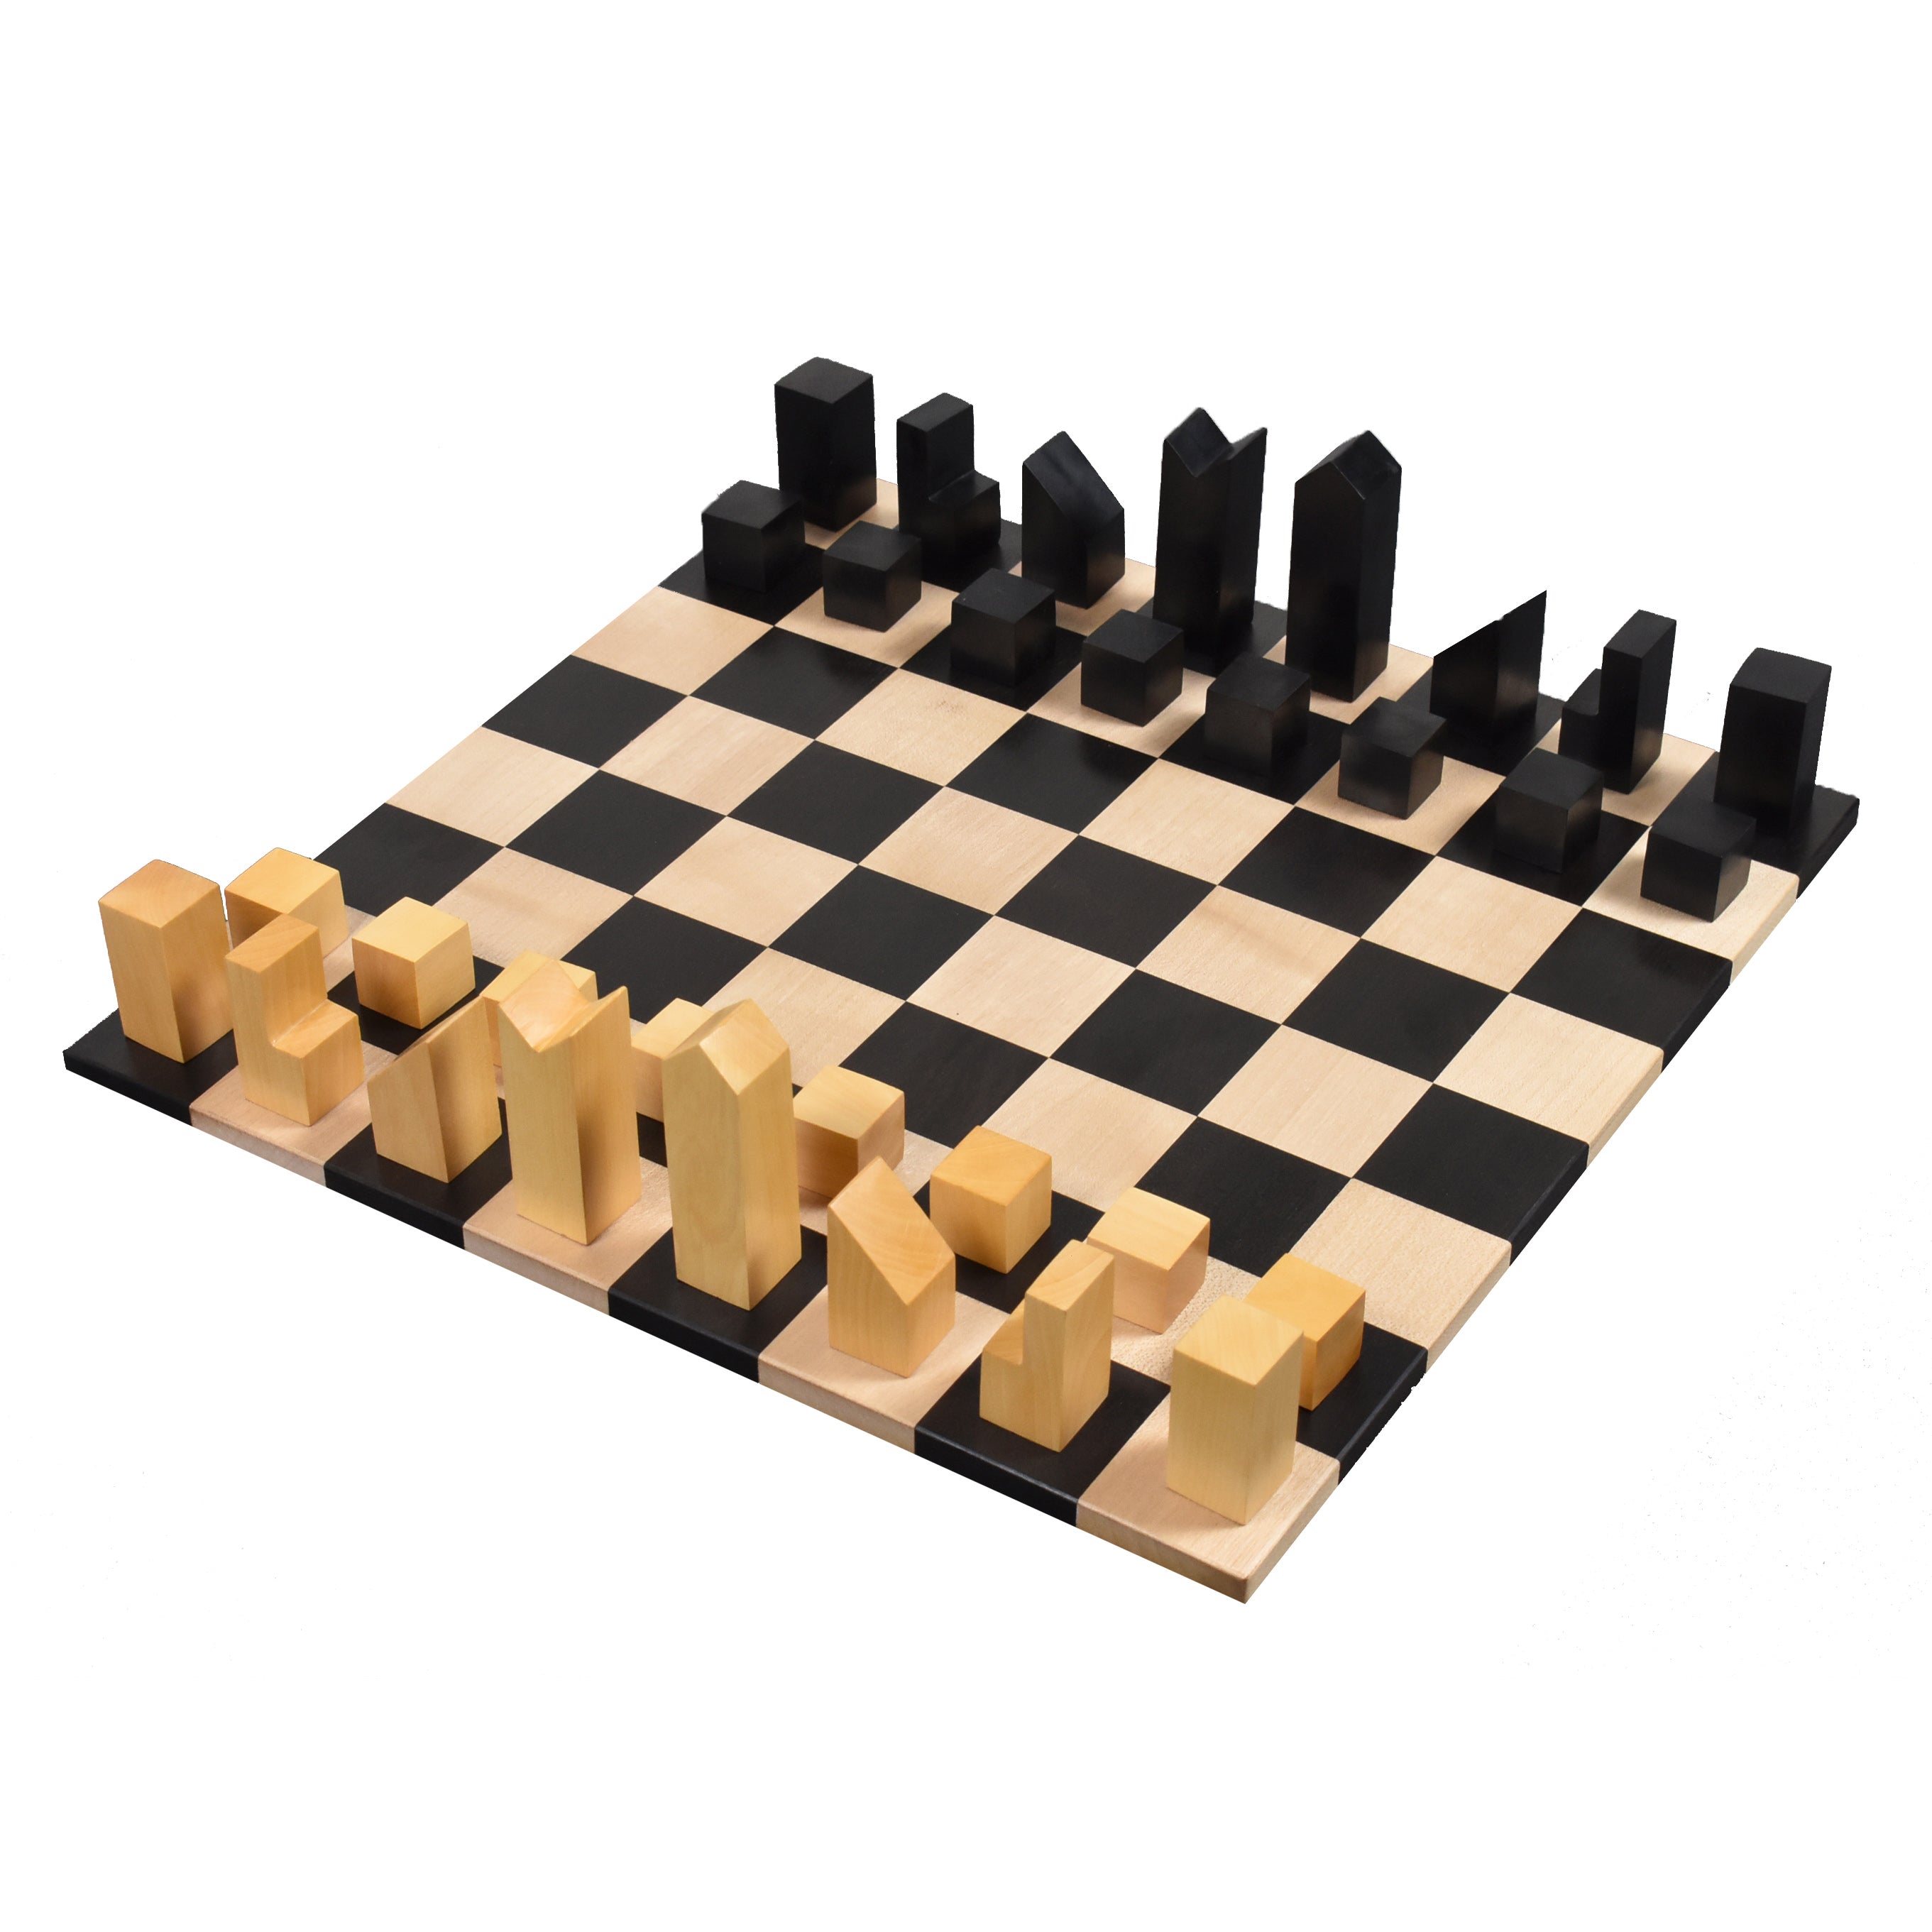 Repro 1966 Lanier Graham Chess pieces Only Absract set